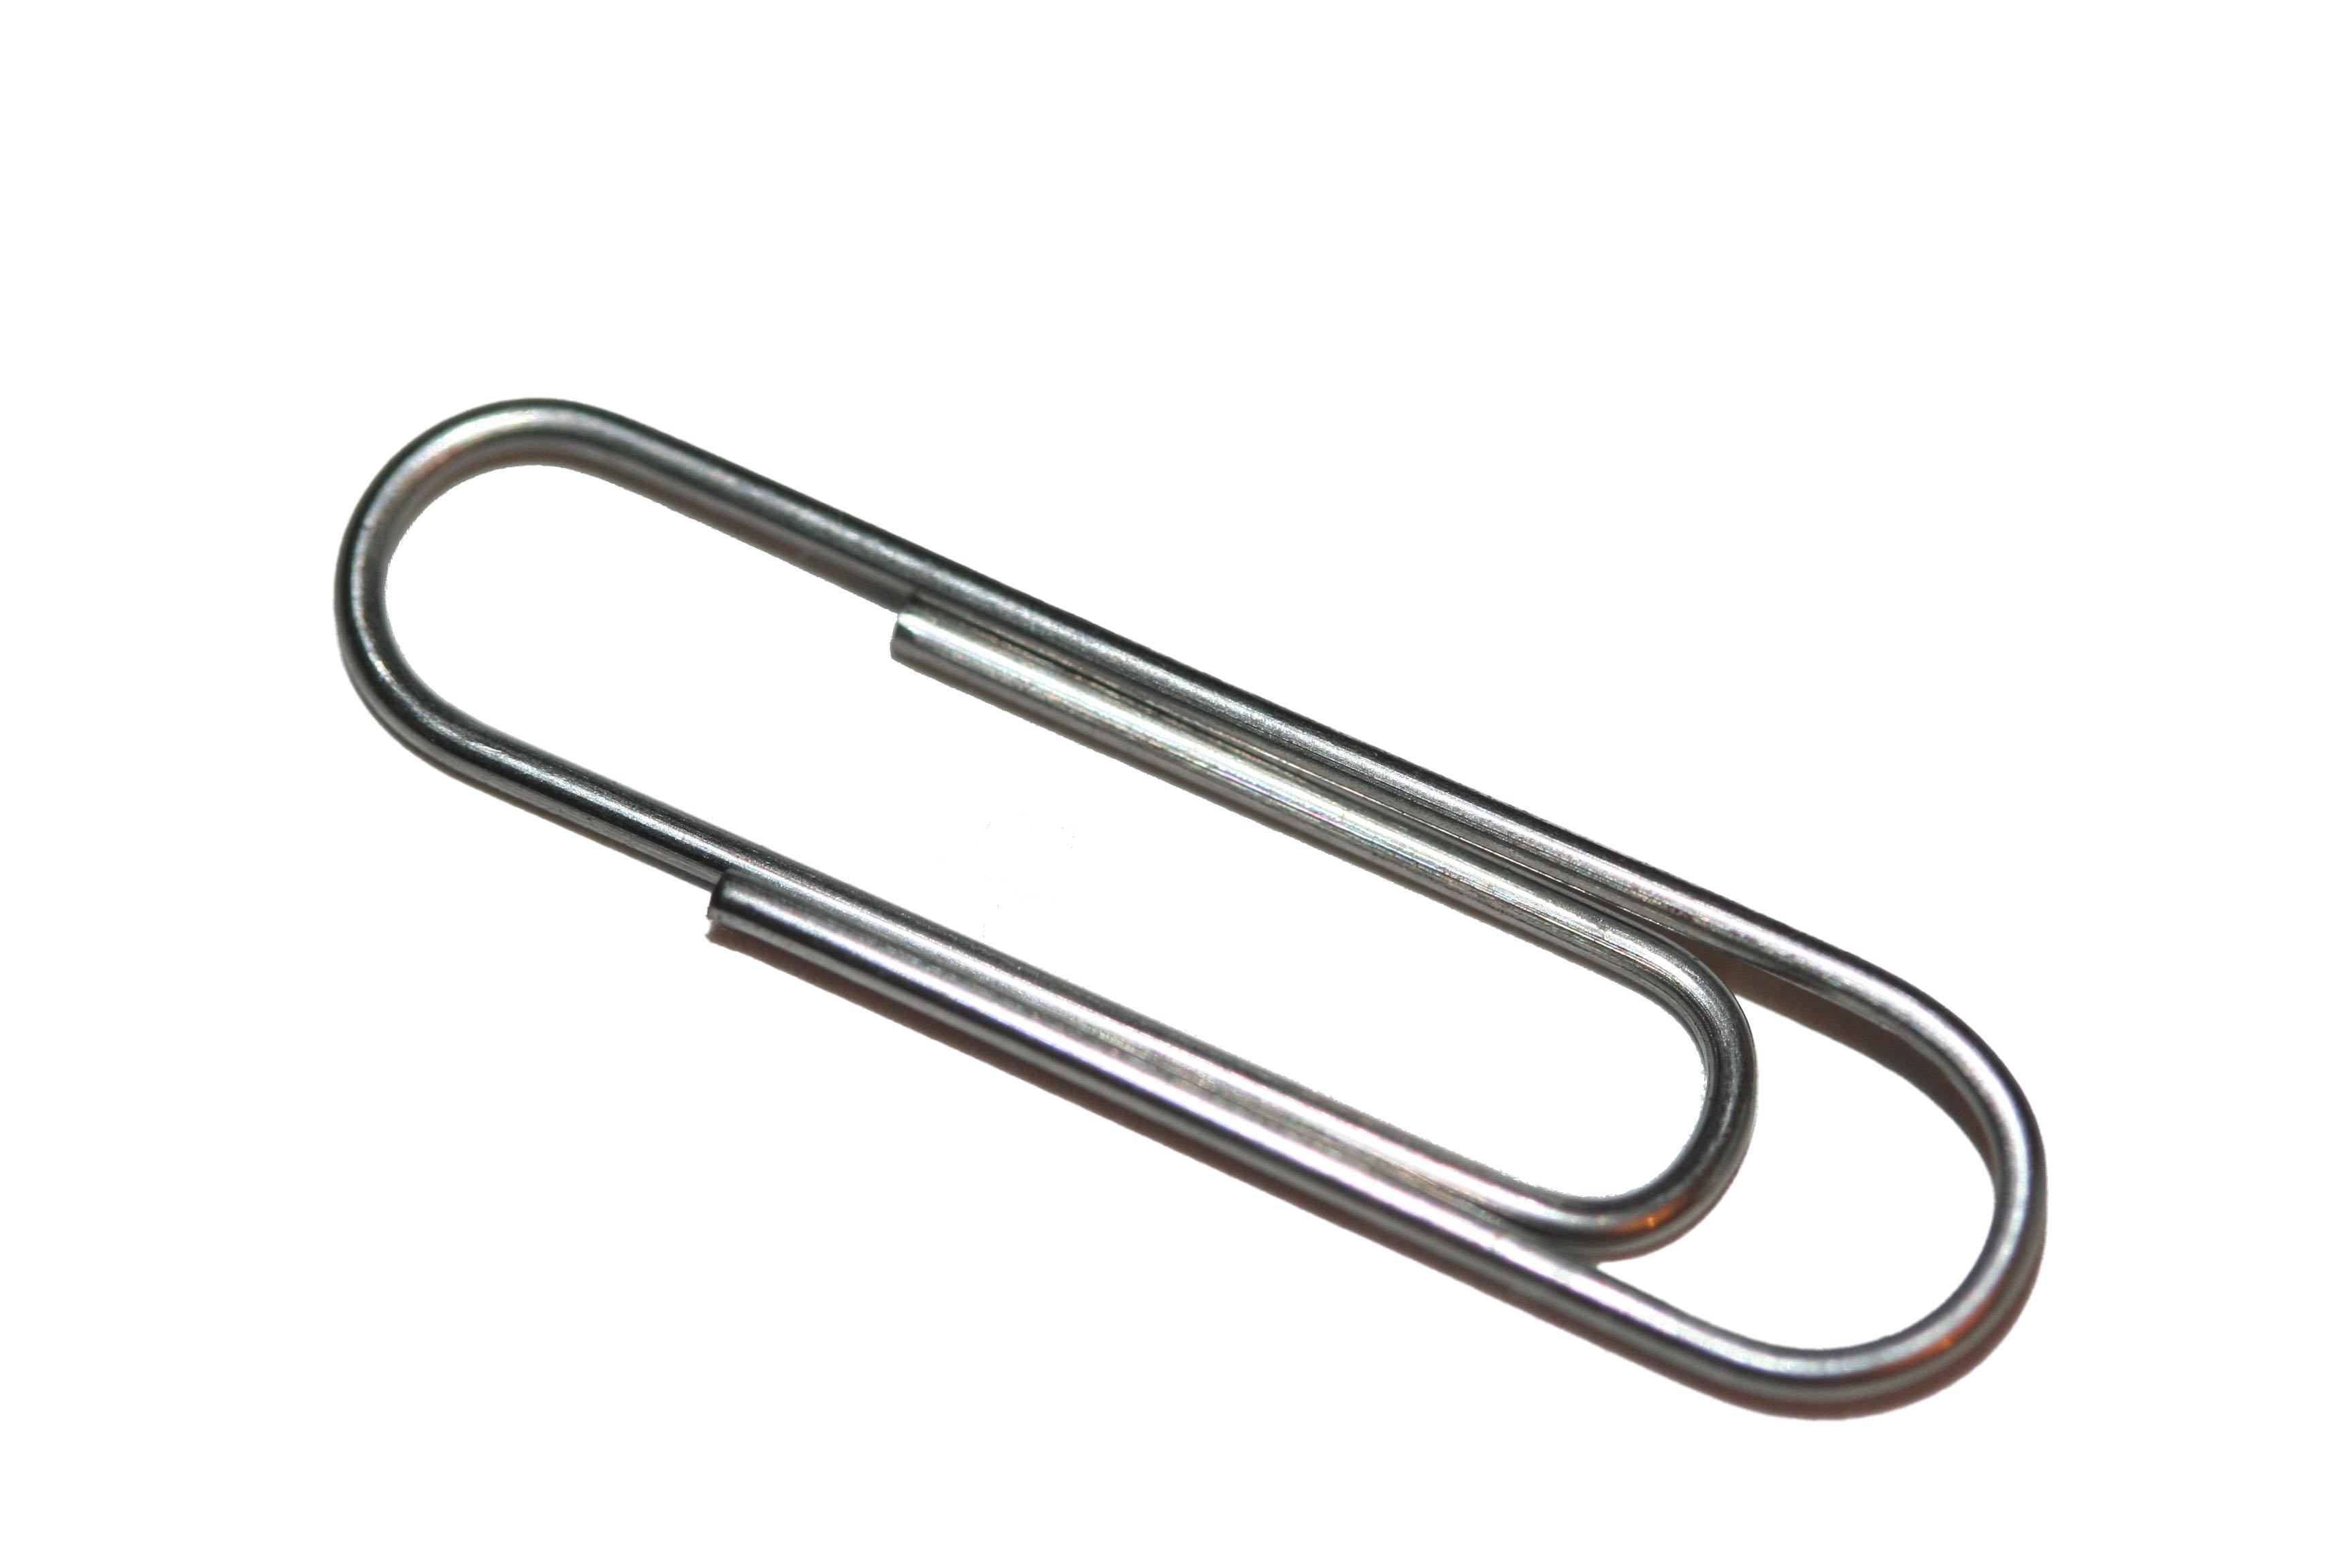 File:Paperclip-01 (xndr).jpg - Wikimedia Commons